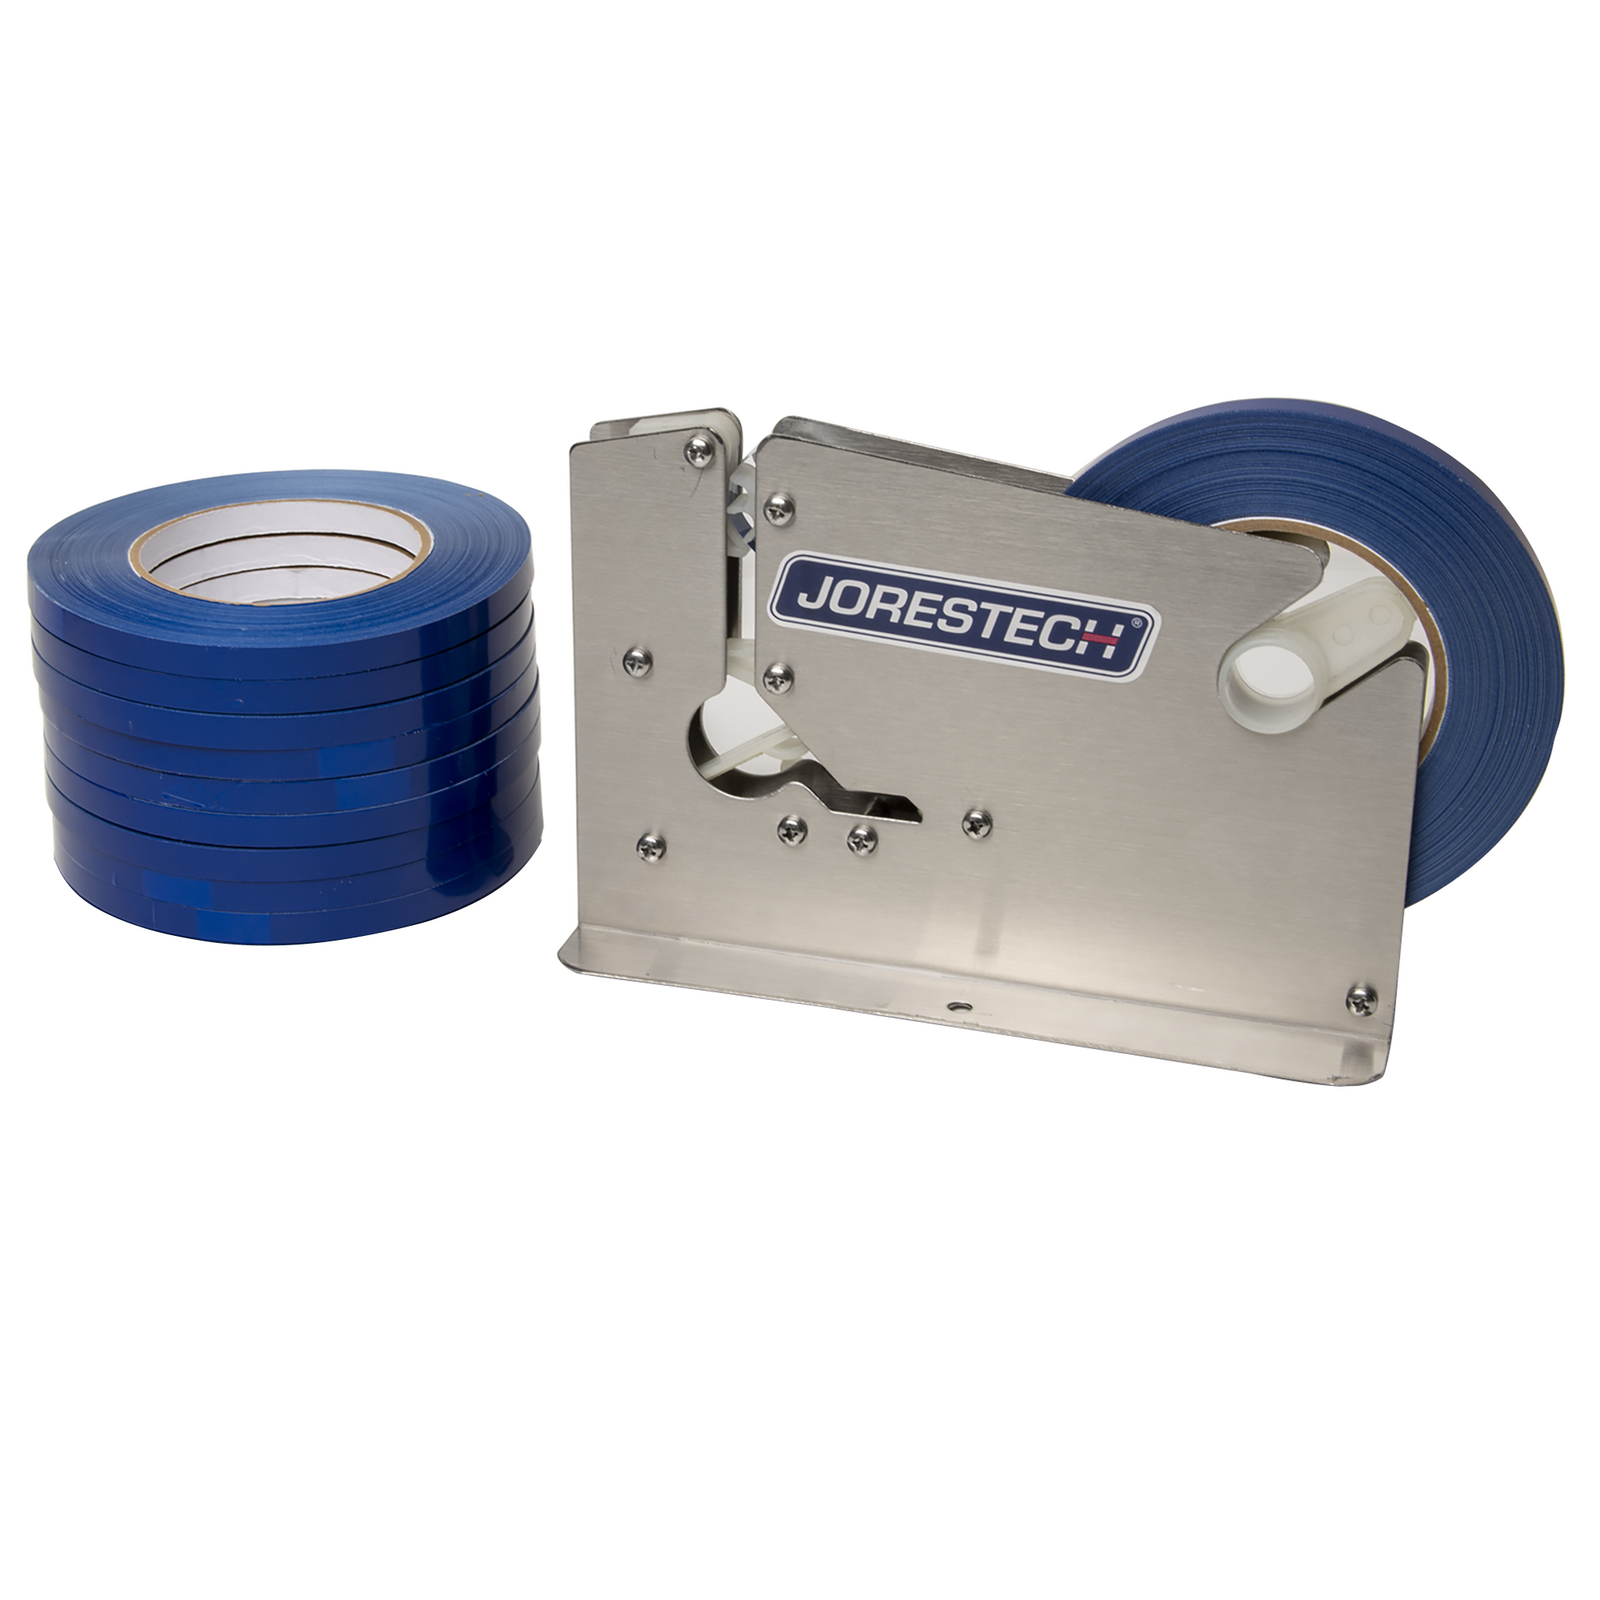 A stainless steel bag closer with blue and white next to 10 adhesive blue tape rolls